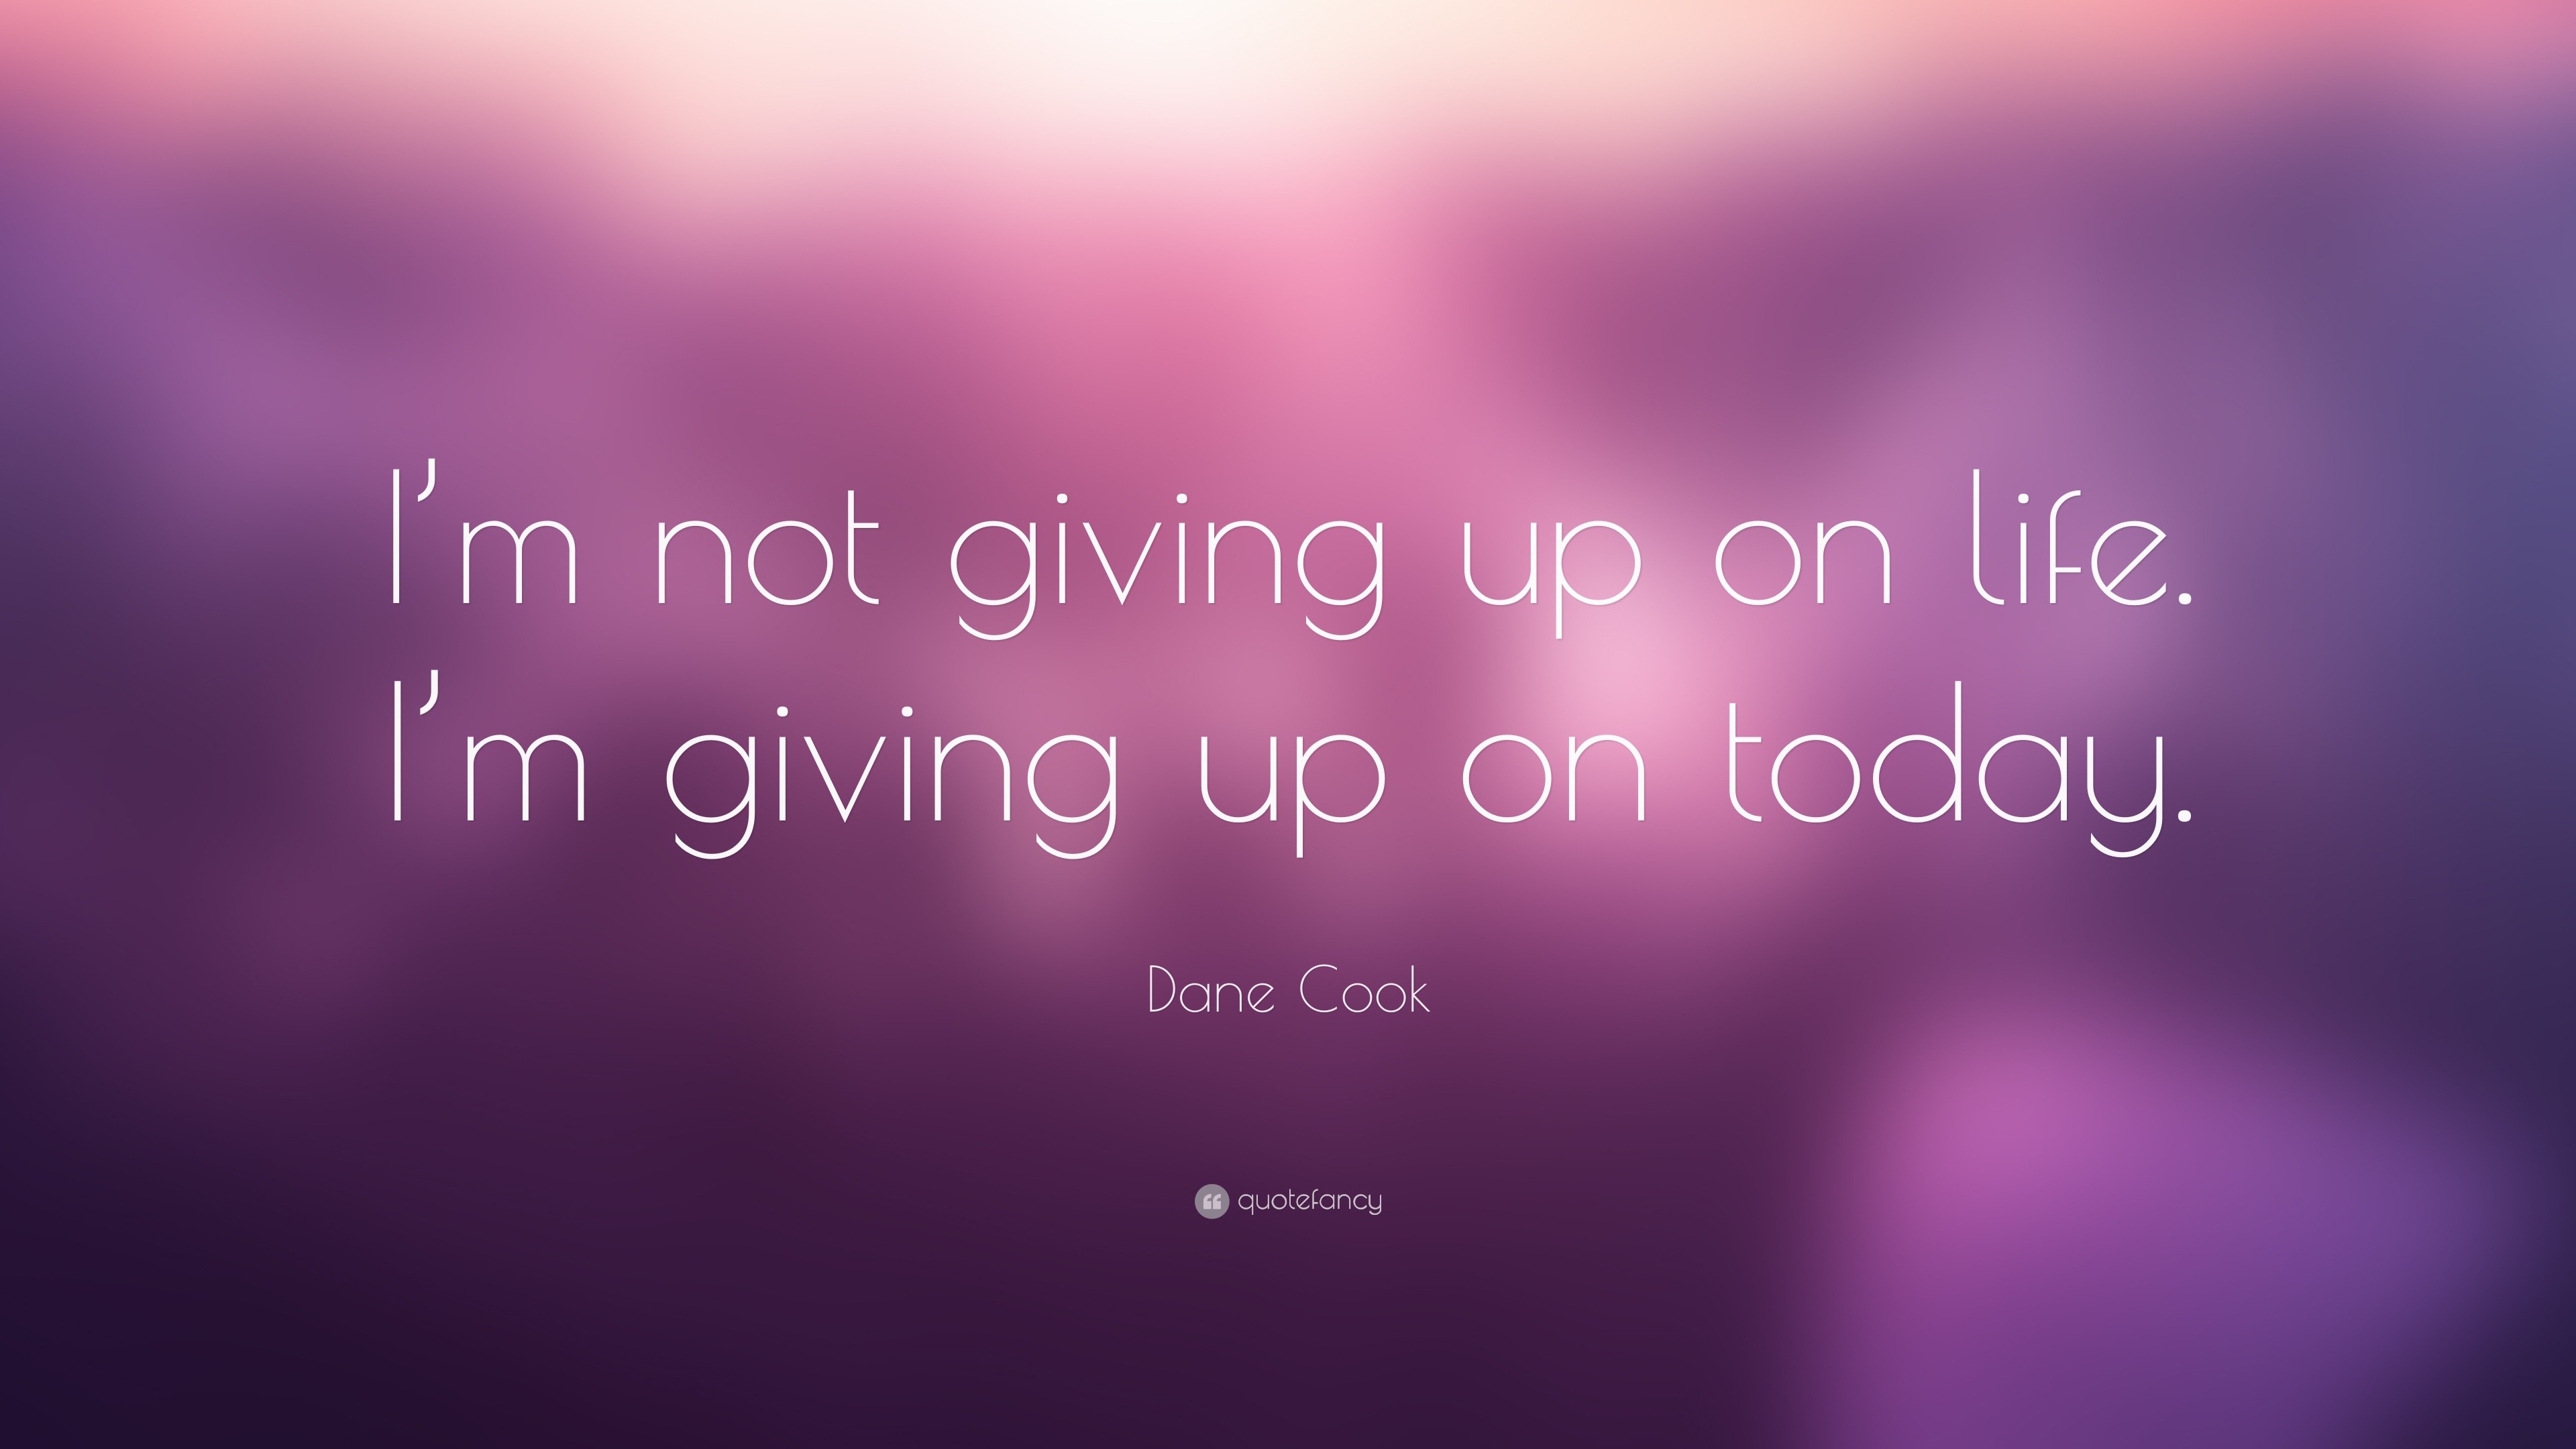 Not Giving Up Quotes (32 wallpapers) - Quotefancy